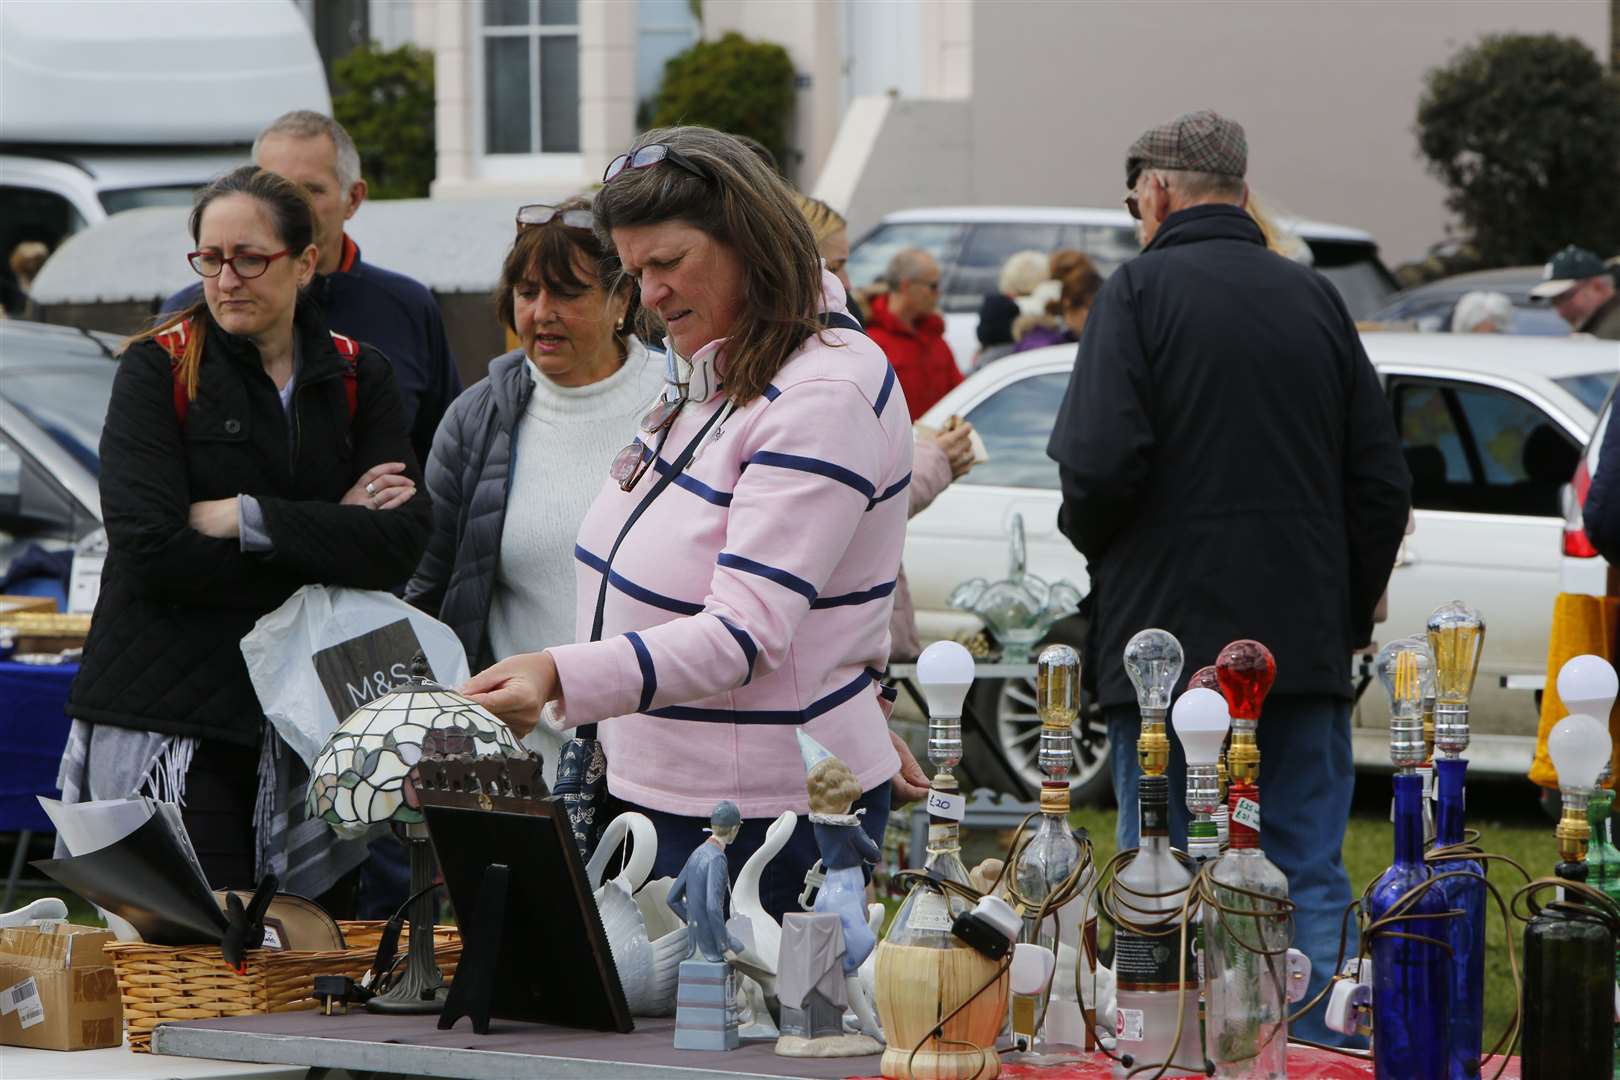 The brocante has become a popular event for antique enthusiasts